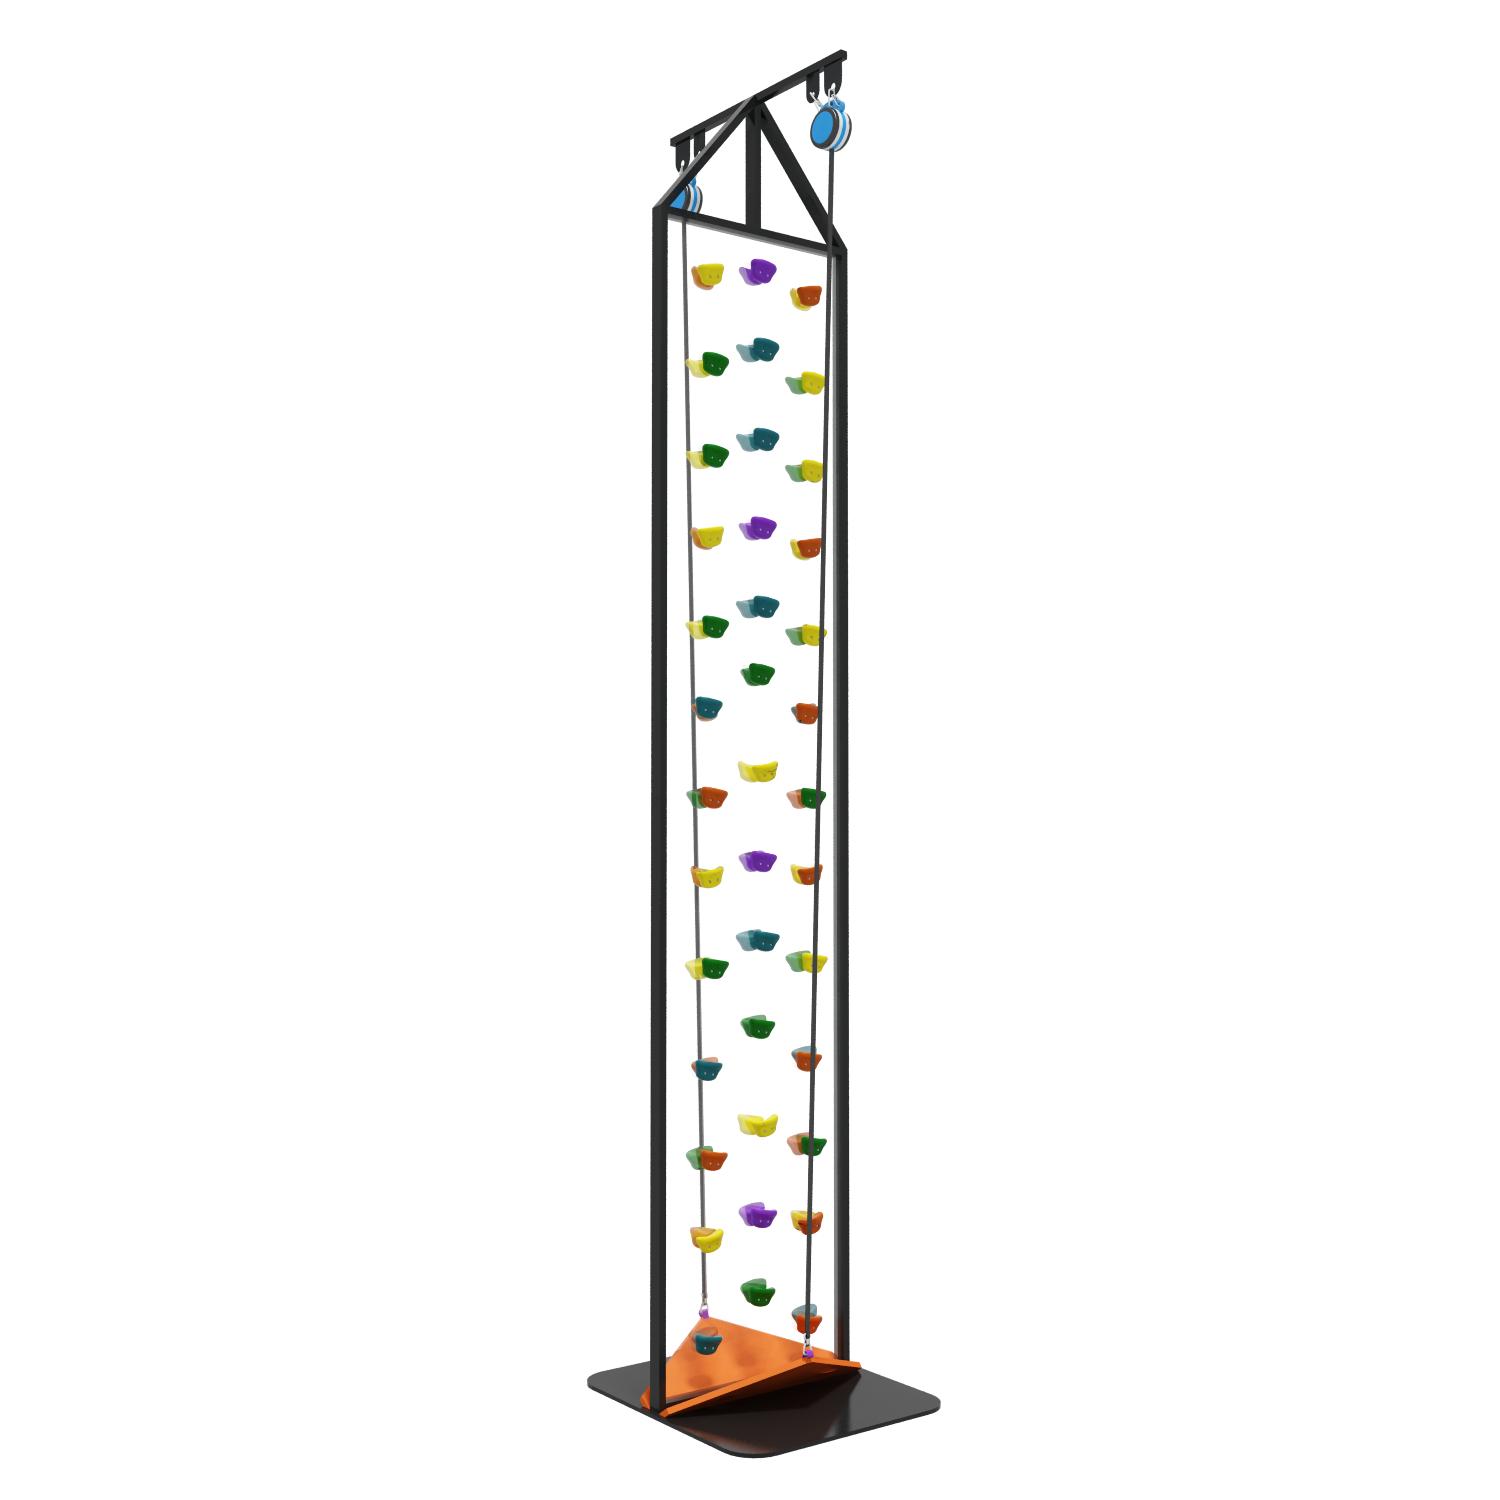 Frame Climbing Wall For Kids With Tires